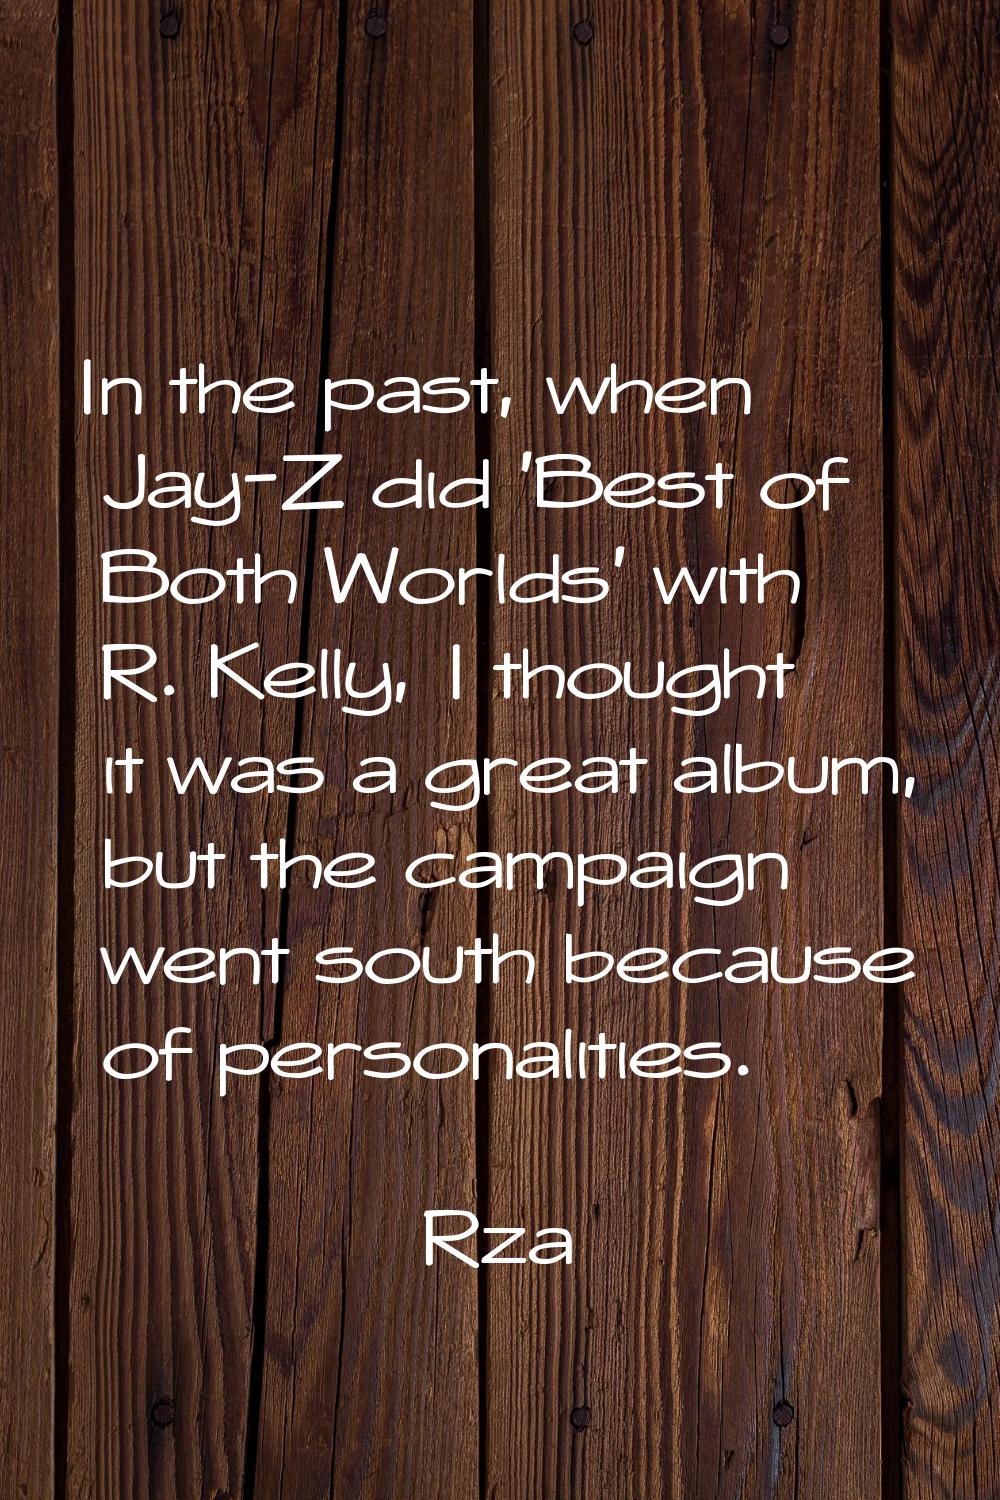 In the past, when Jay-Z did 'Best of Both Worlds' with R. Kelly, I thought it was a great album, bu